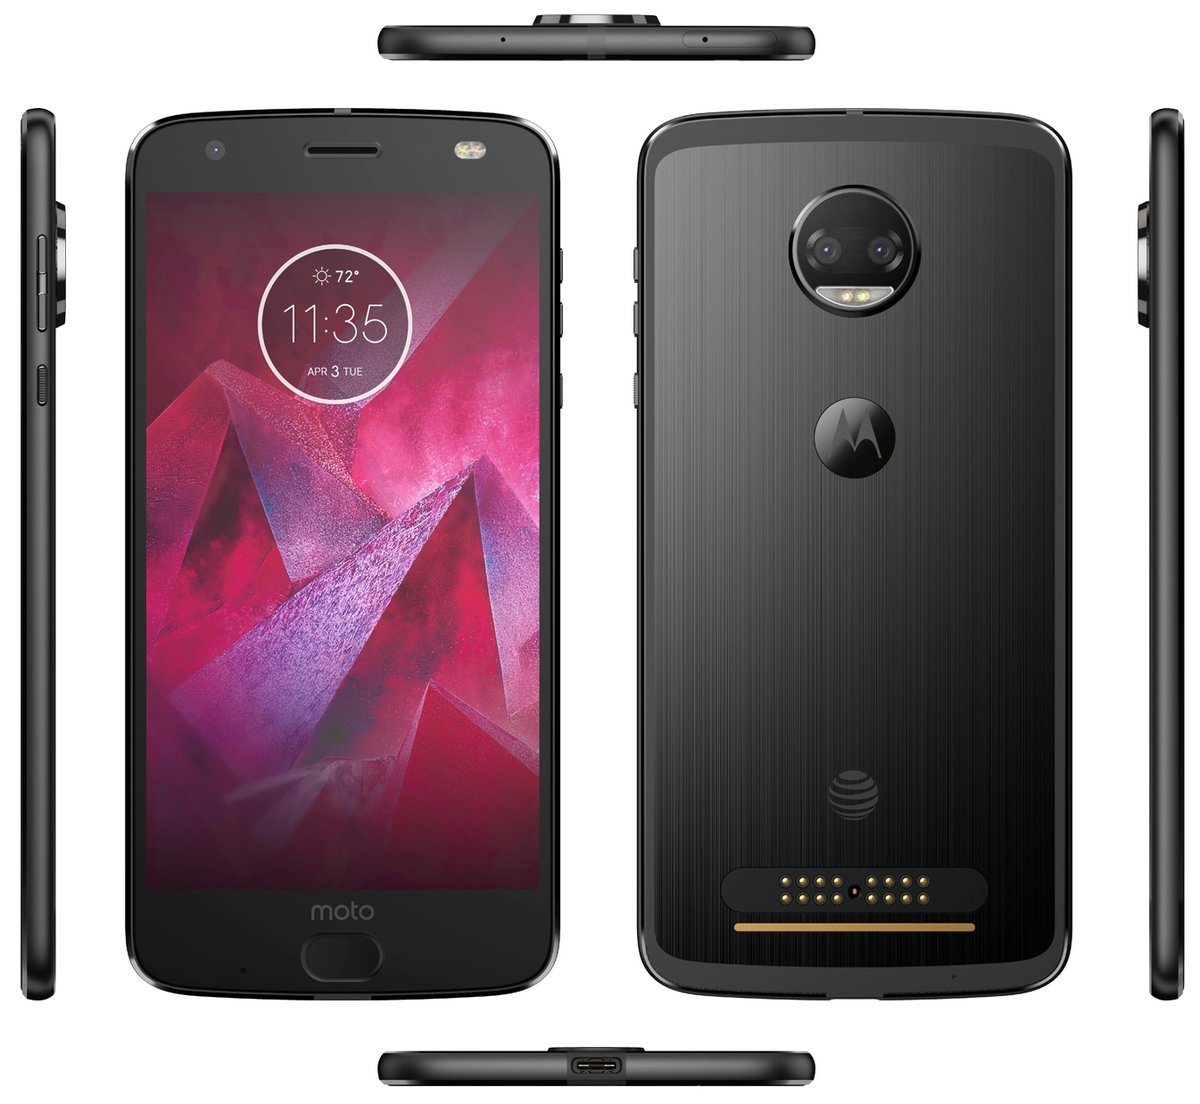 Leaked Moto Z2 Force Press Image Shows Nexus 5 Looks and Dual Rear Cameras